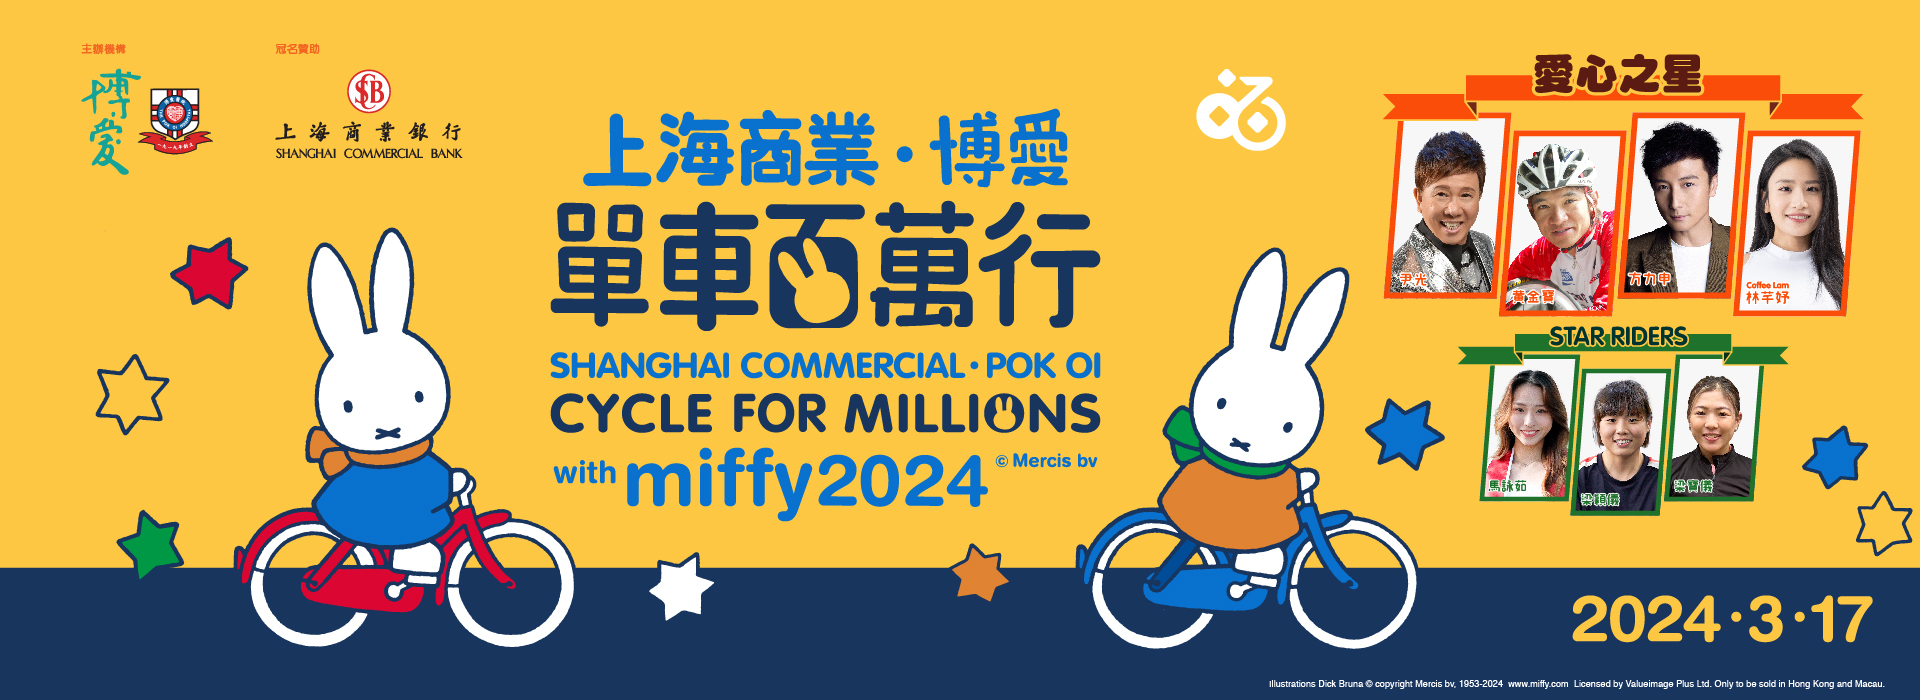 Shanghai Commercial Pok Oi Cycle for Millions 2024